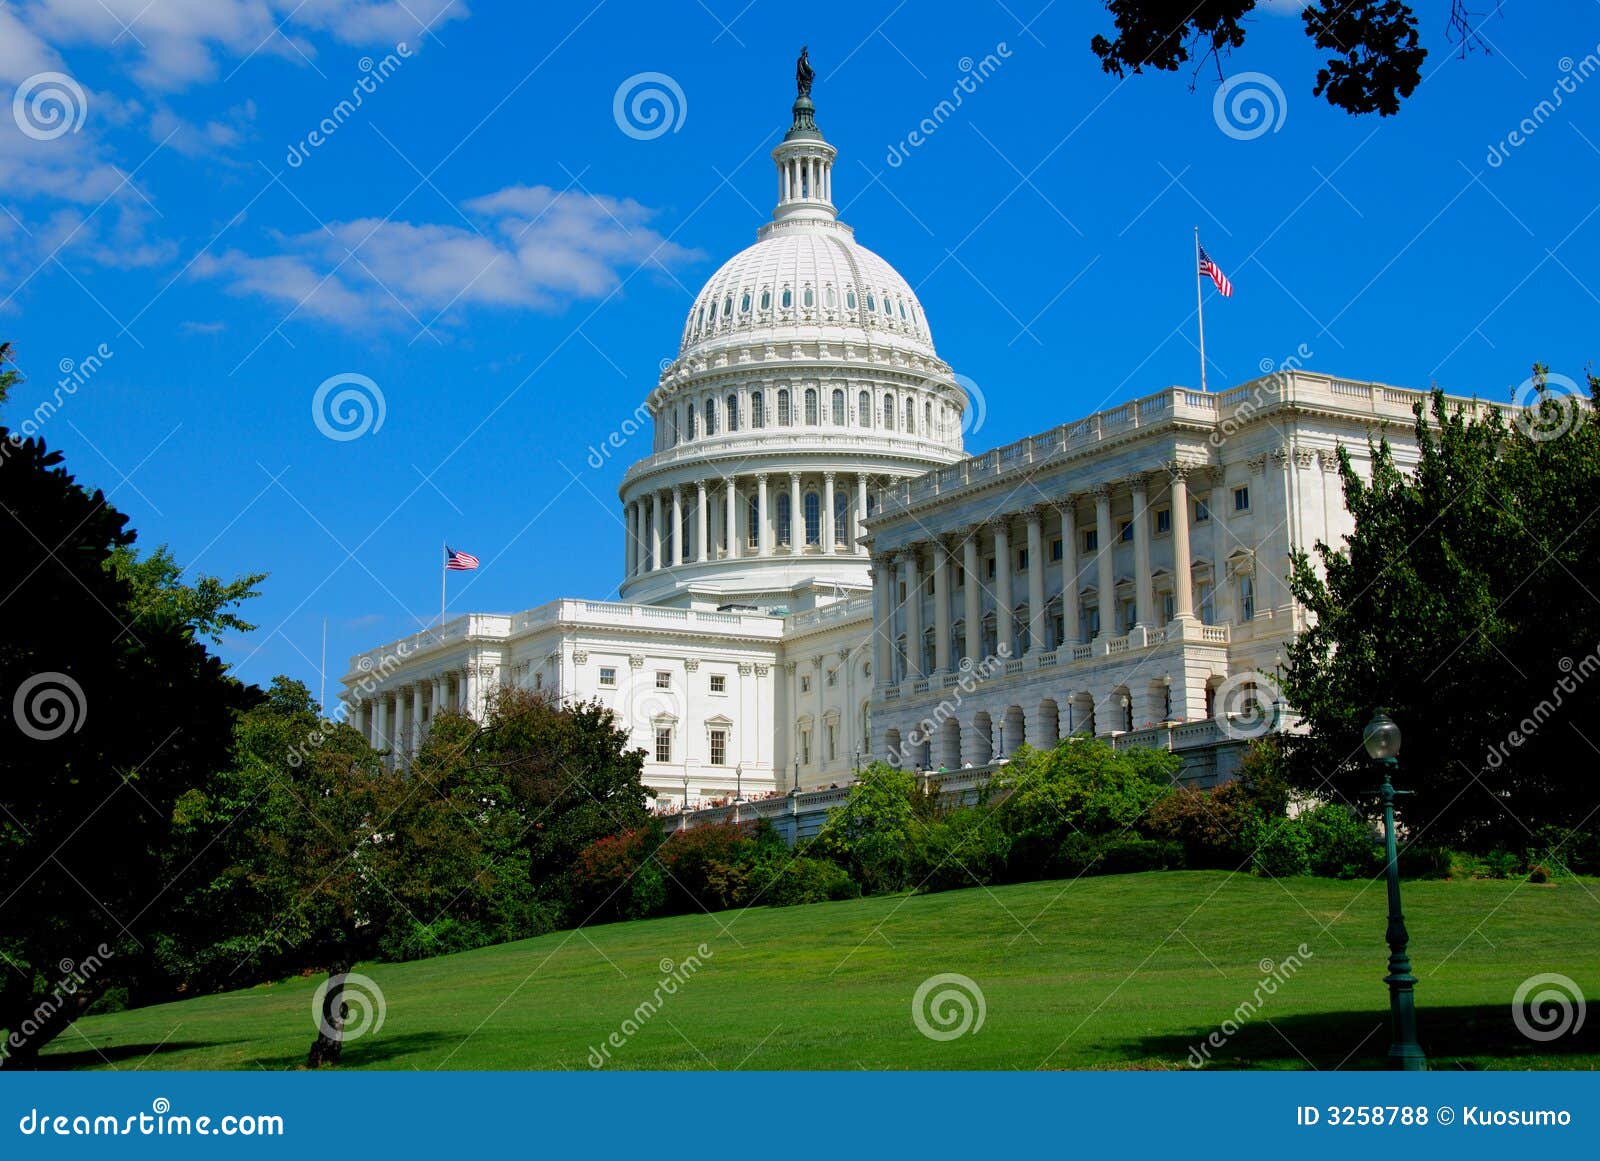 capitol of united states